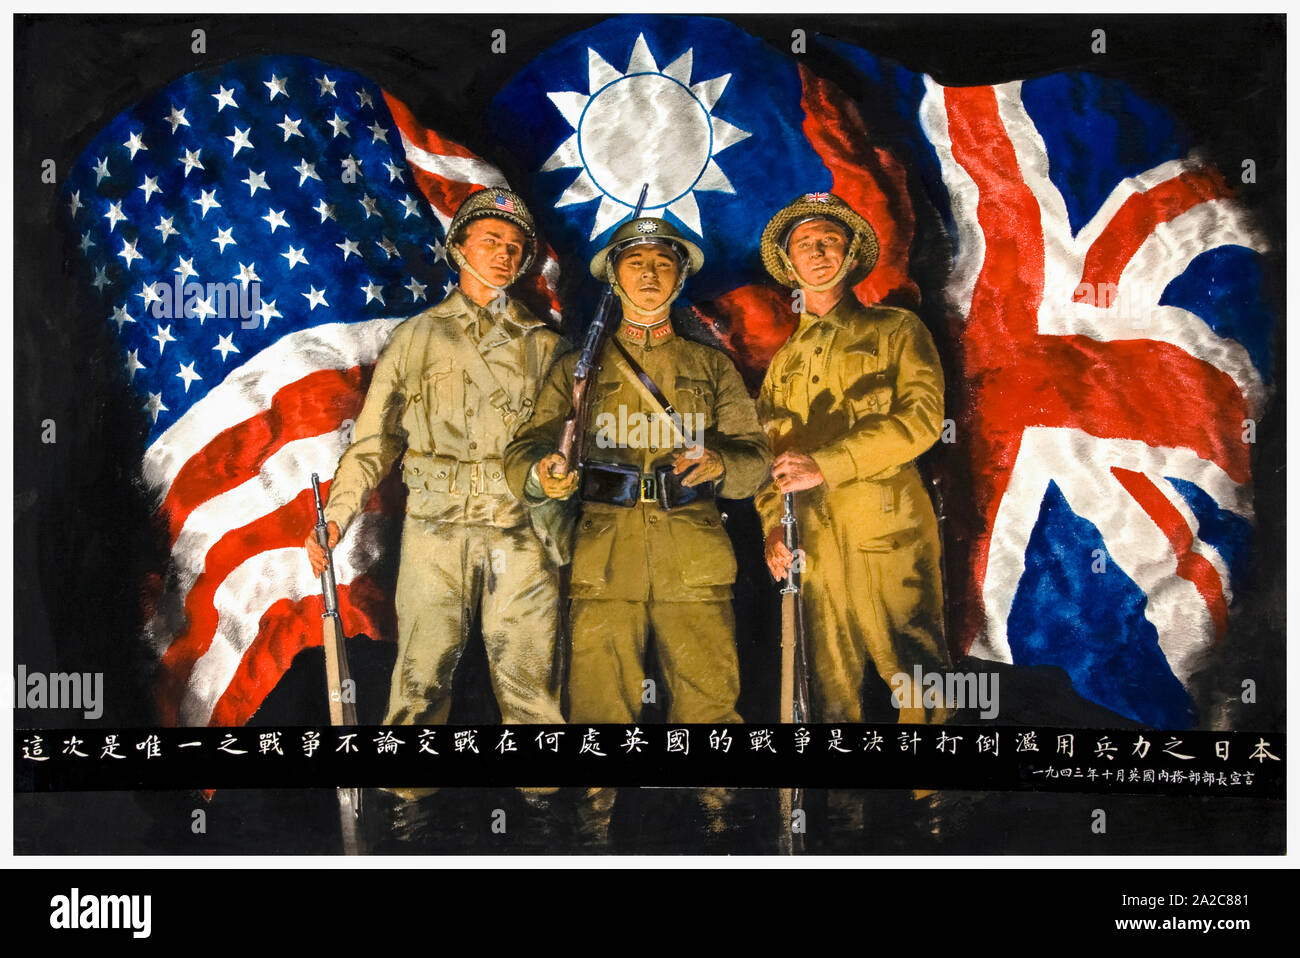 British, WW2, Unity of Strength, Inter-allied co-operation, American, Chinese and British soldiers with flags of their countries, (Chinese text), poster, 1943 Stock Photo